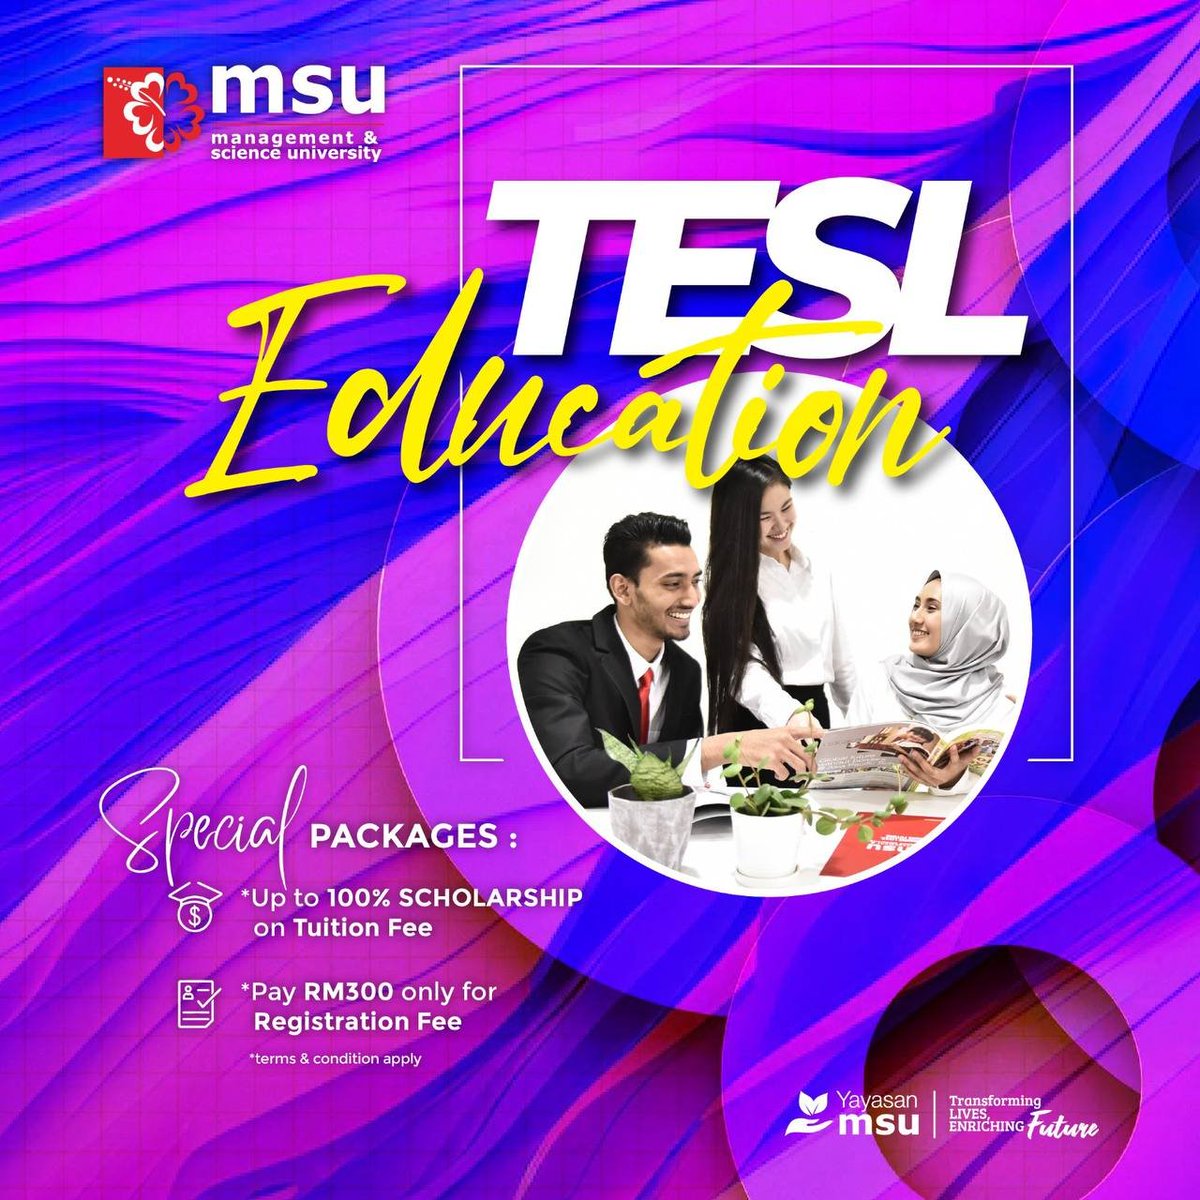 Have passion in education? Find out more about all requirements needed to fulfill your dream 👩‍🏫
.
Enquiry⬇️
☎️: 04-4257602 or wa.link/d7j63h
💻: linktr.ee/msucollege.sp

#msumalaysia 
#msusungaipetani 
#spm2022 
#spm2021
#tesl